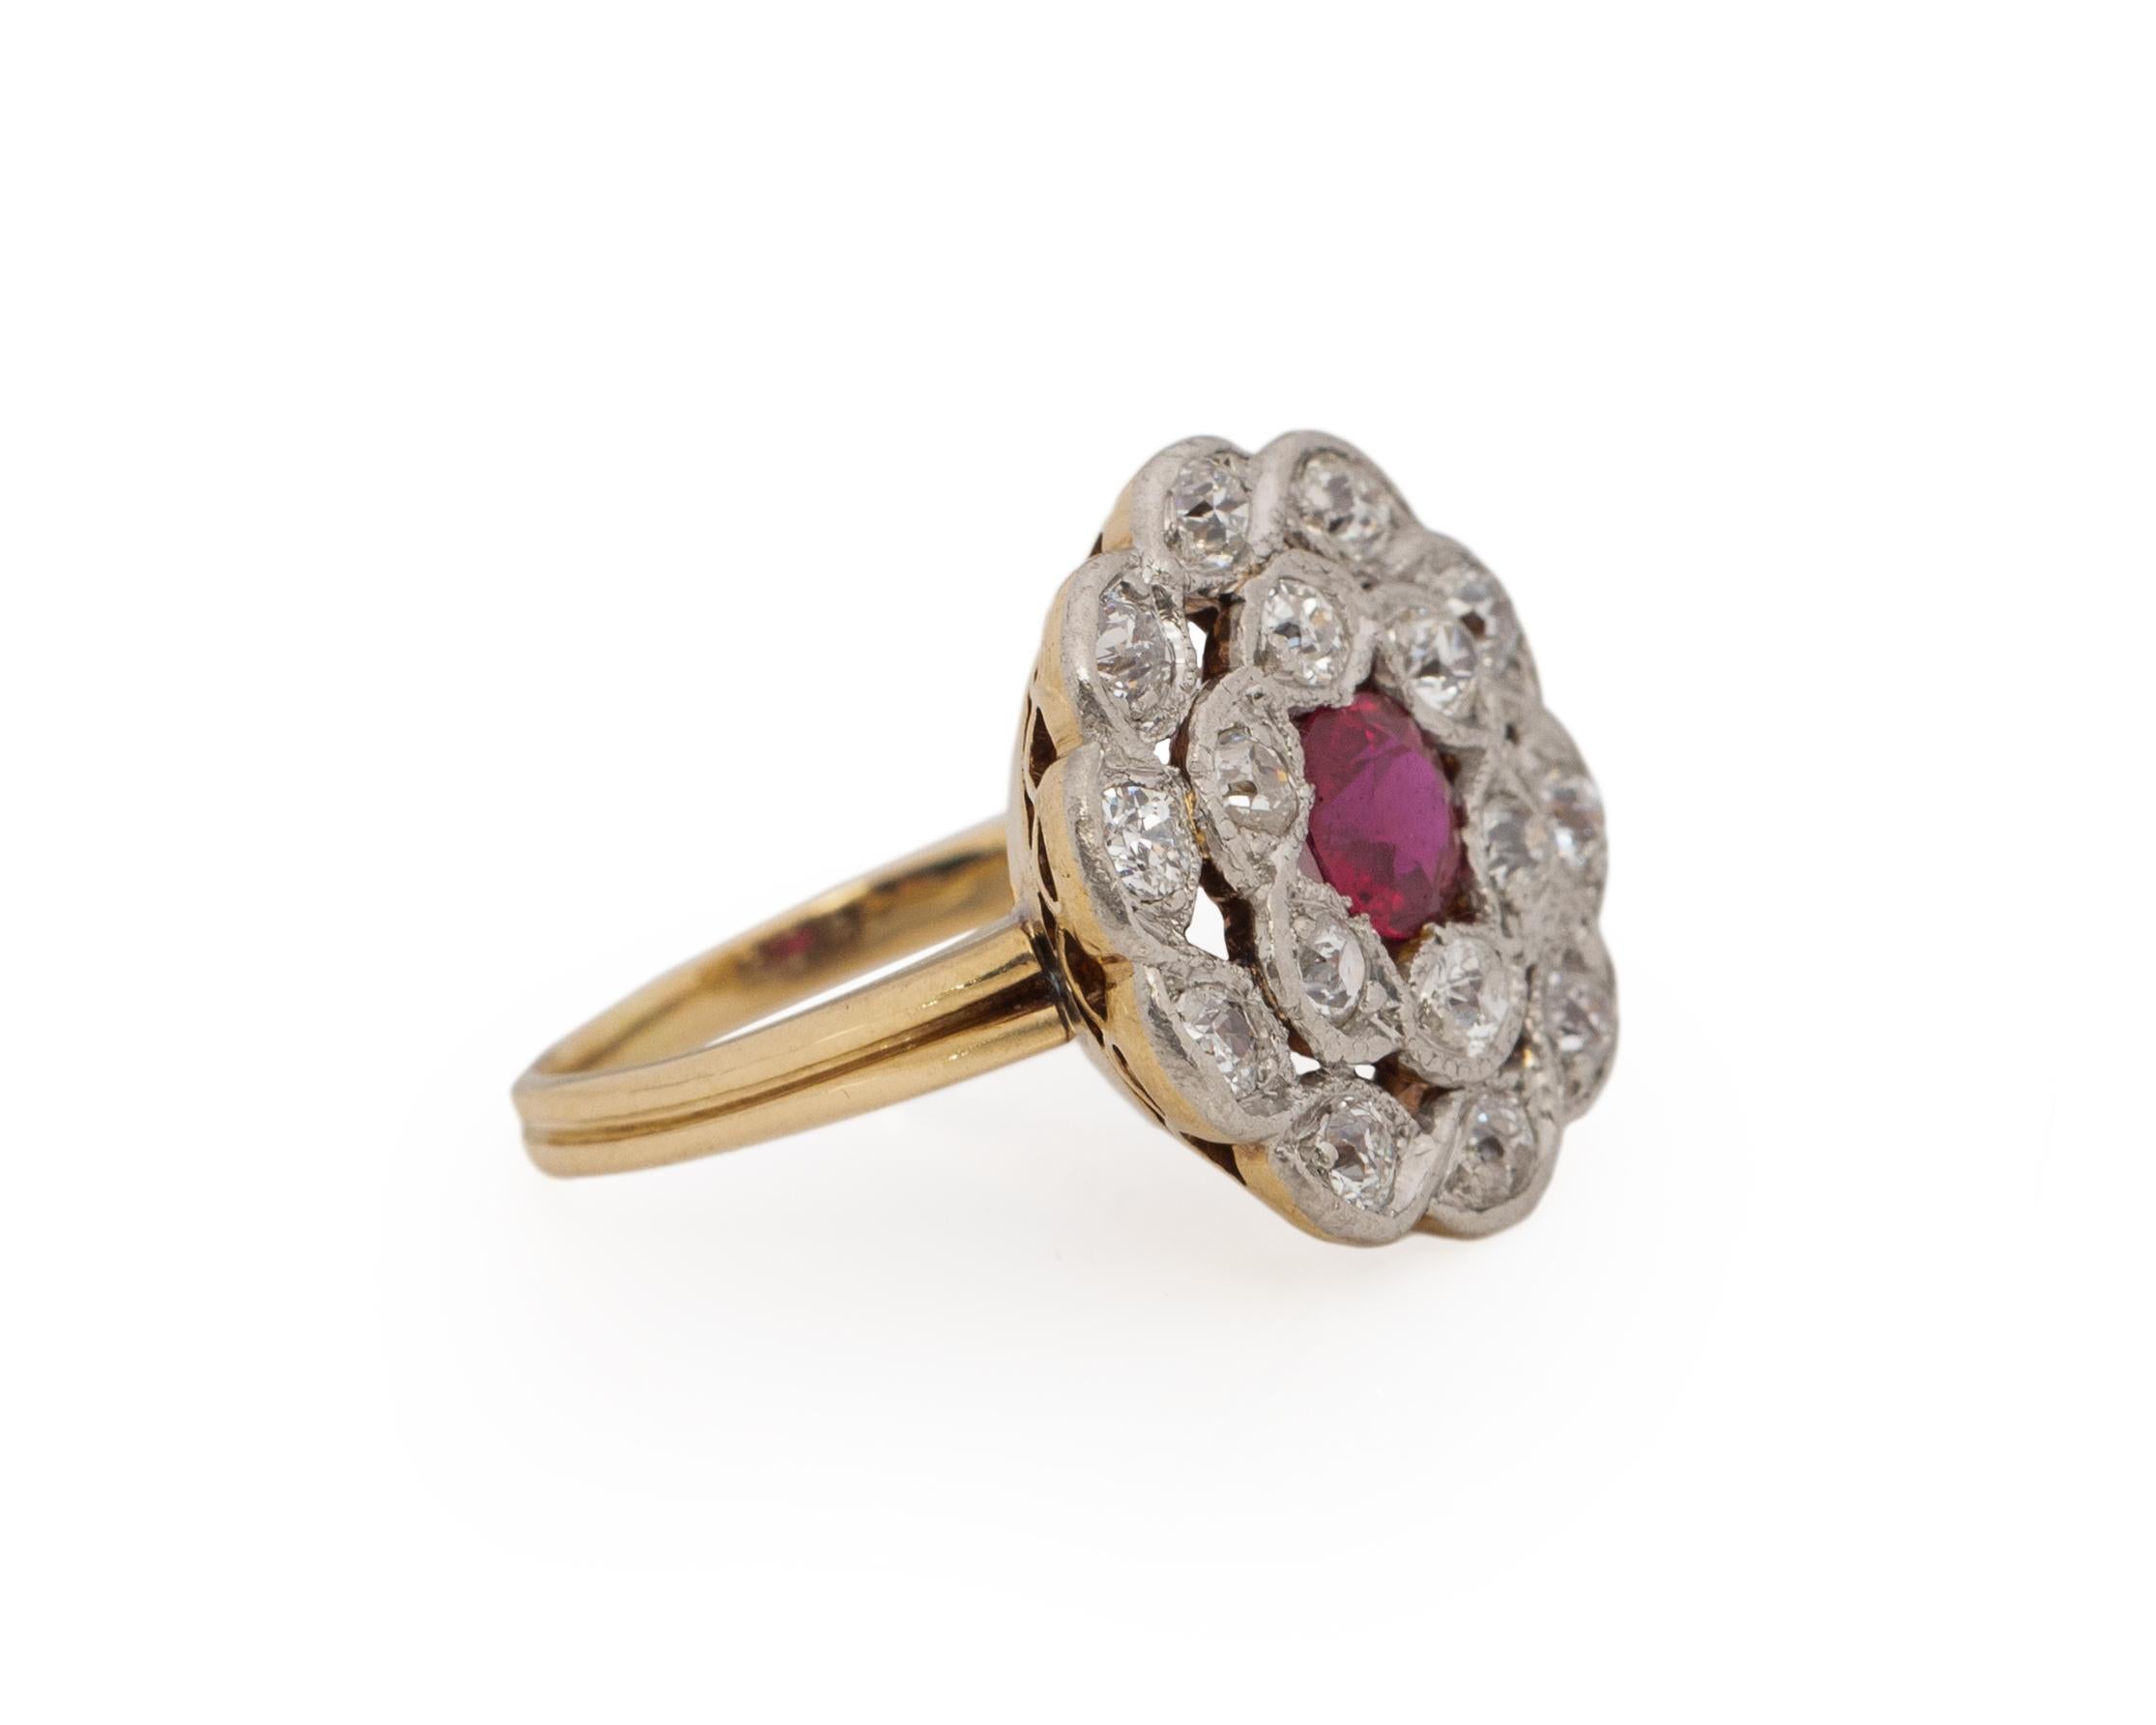 Ring Size: 5.5
Metal Type: 14k Yellow Gold & Platinum [Hallmarked, and Tested]
Weight: 5.6 grams

Diamond Details:
Weight: .75ct, total weight
Cut: Antique European Cut
Color: G-H
Clarity: VS

Ruby Details: .50ct, Synthetic, Old European Brilliant